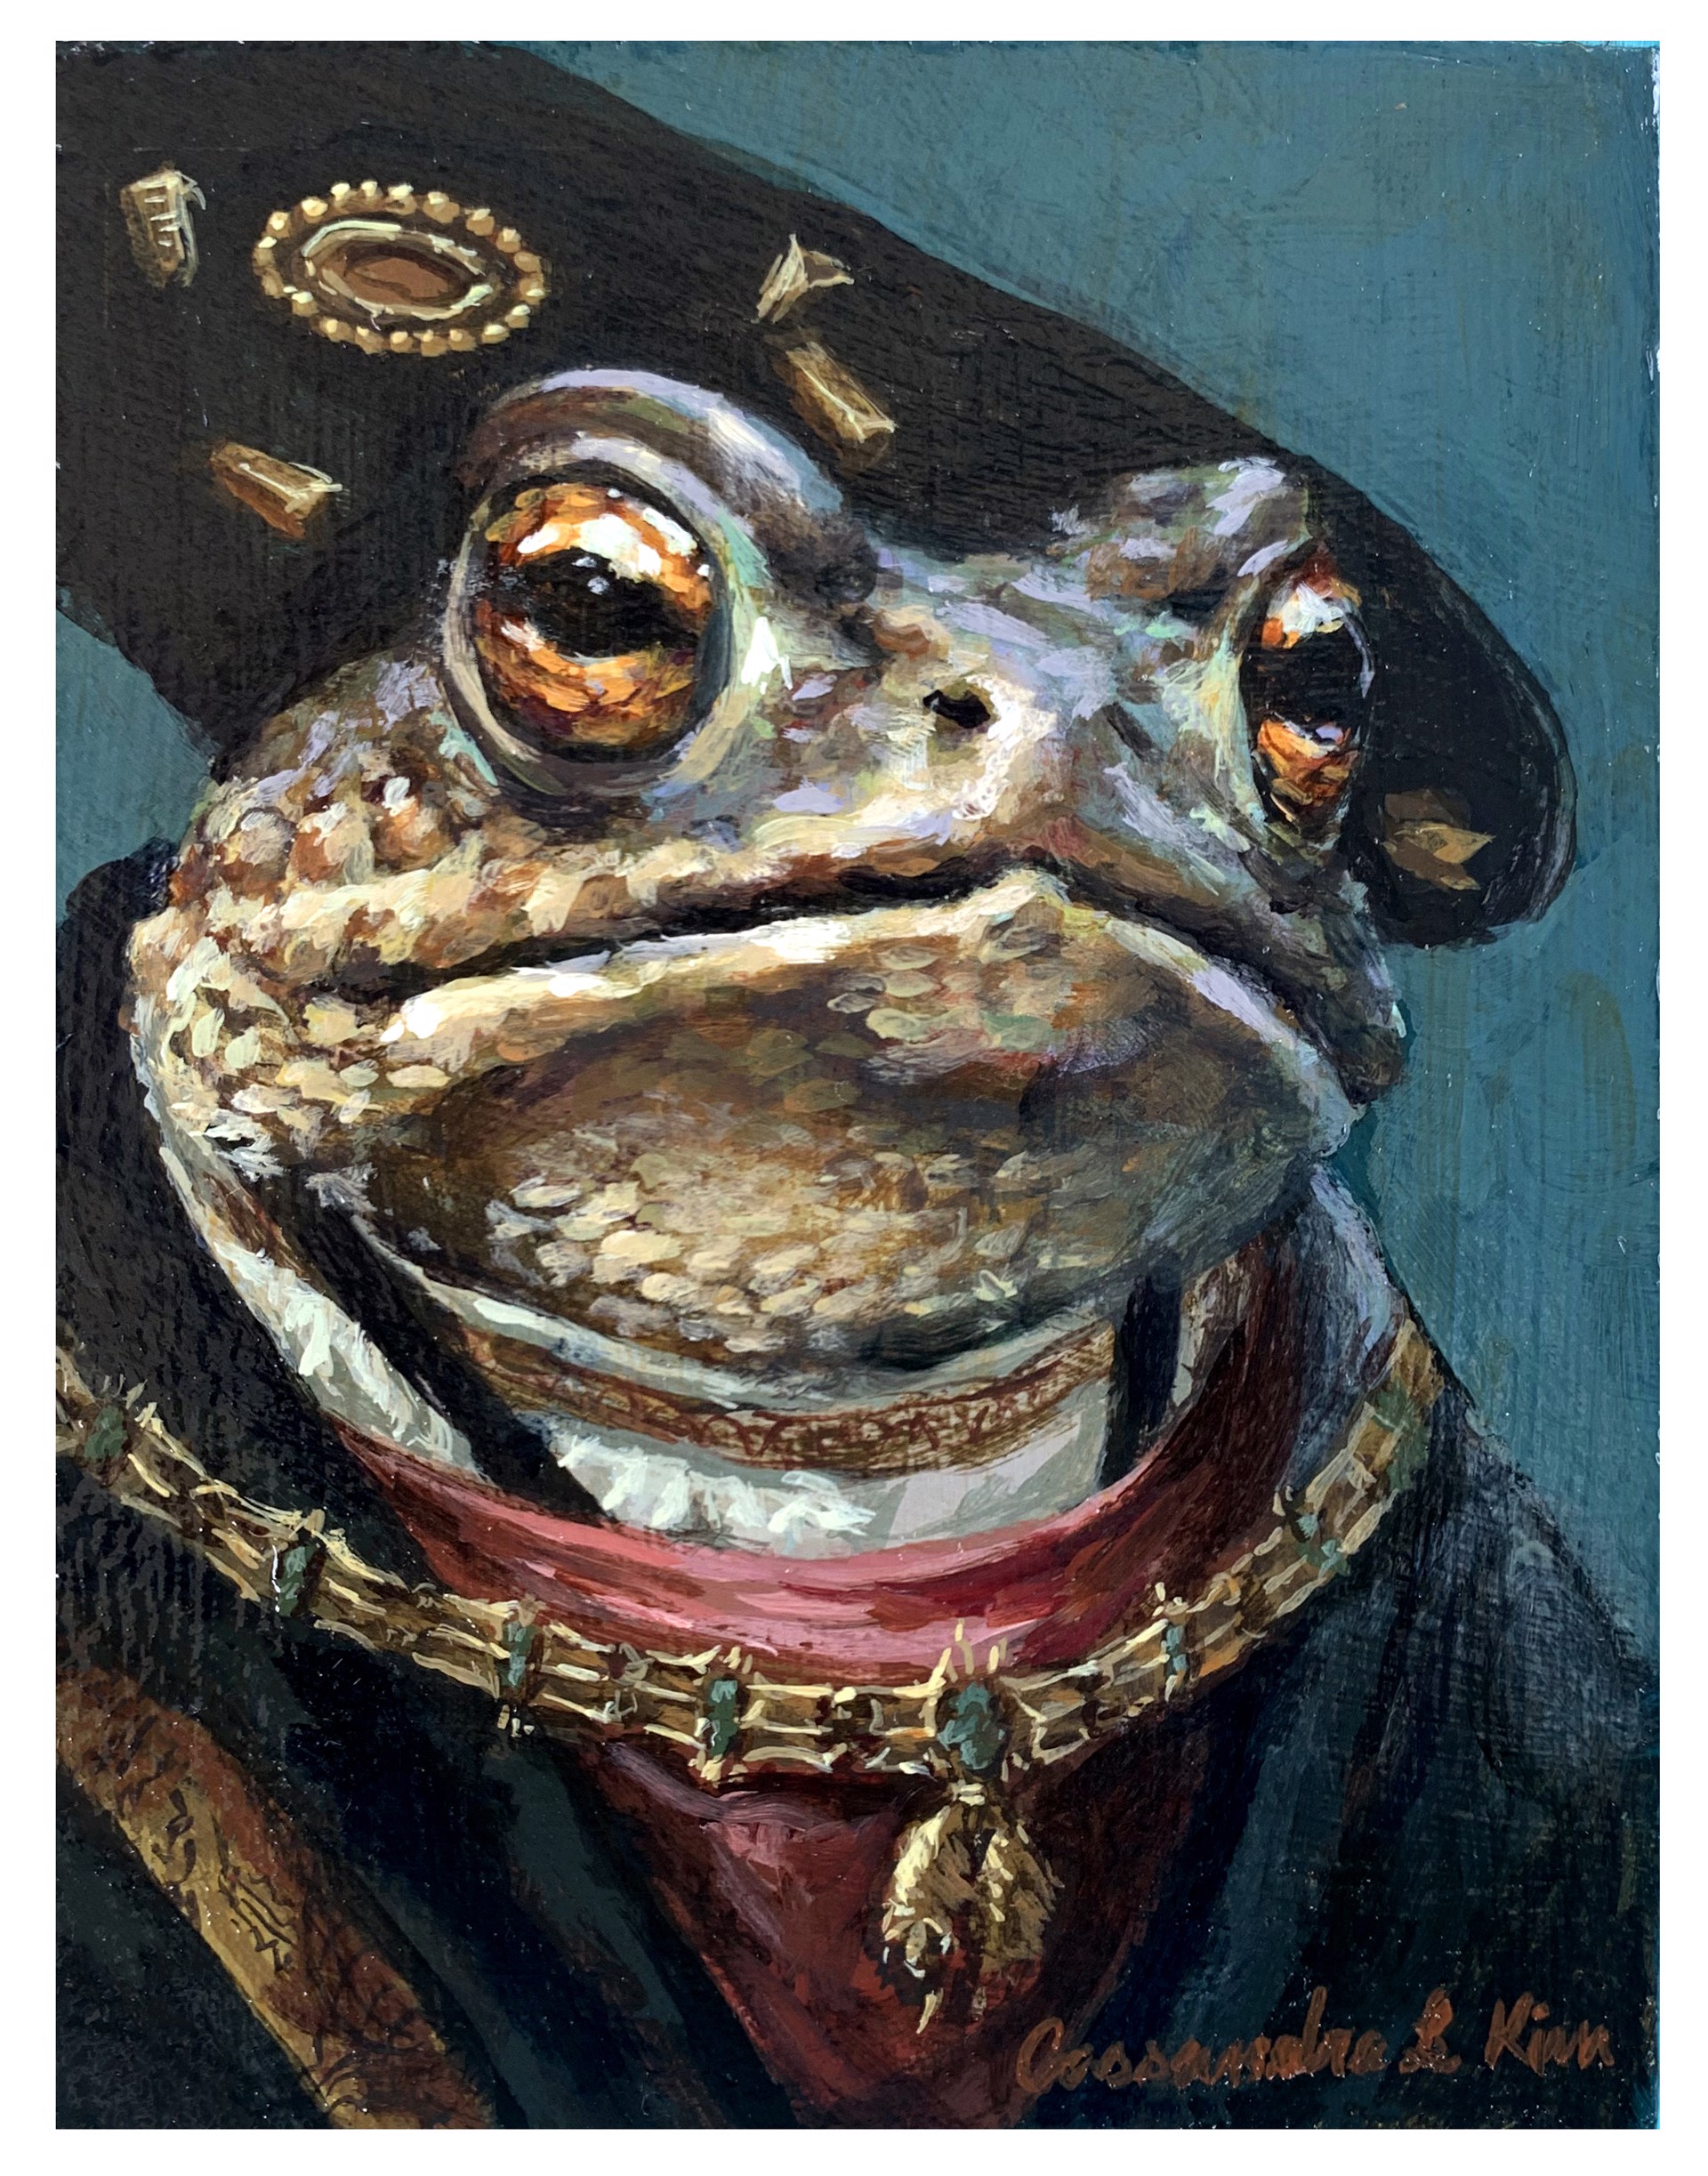 Toad the 5th by Cassandra Kim